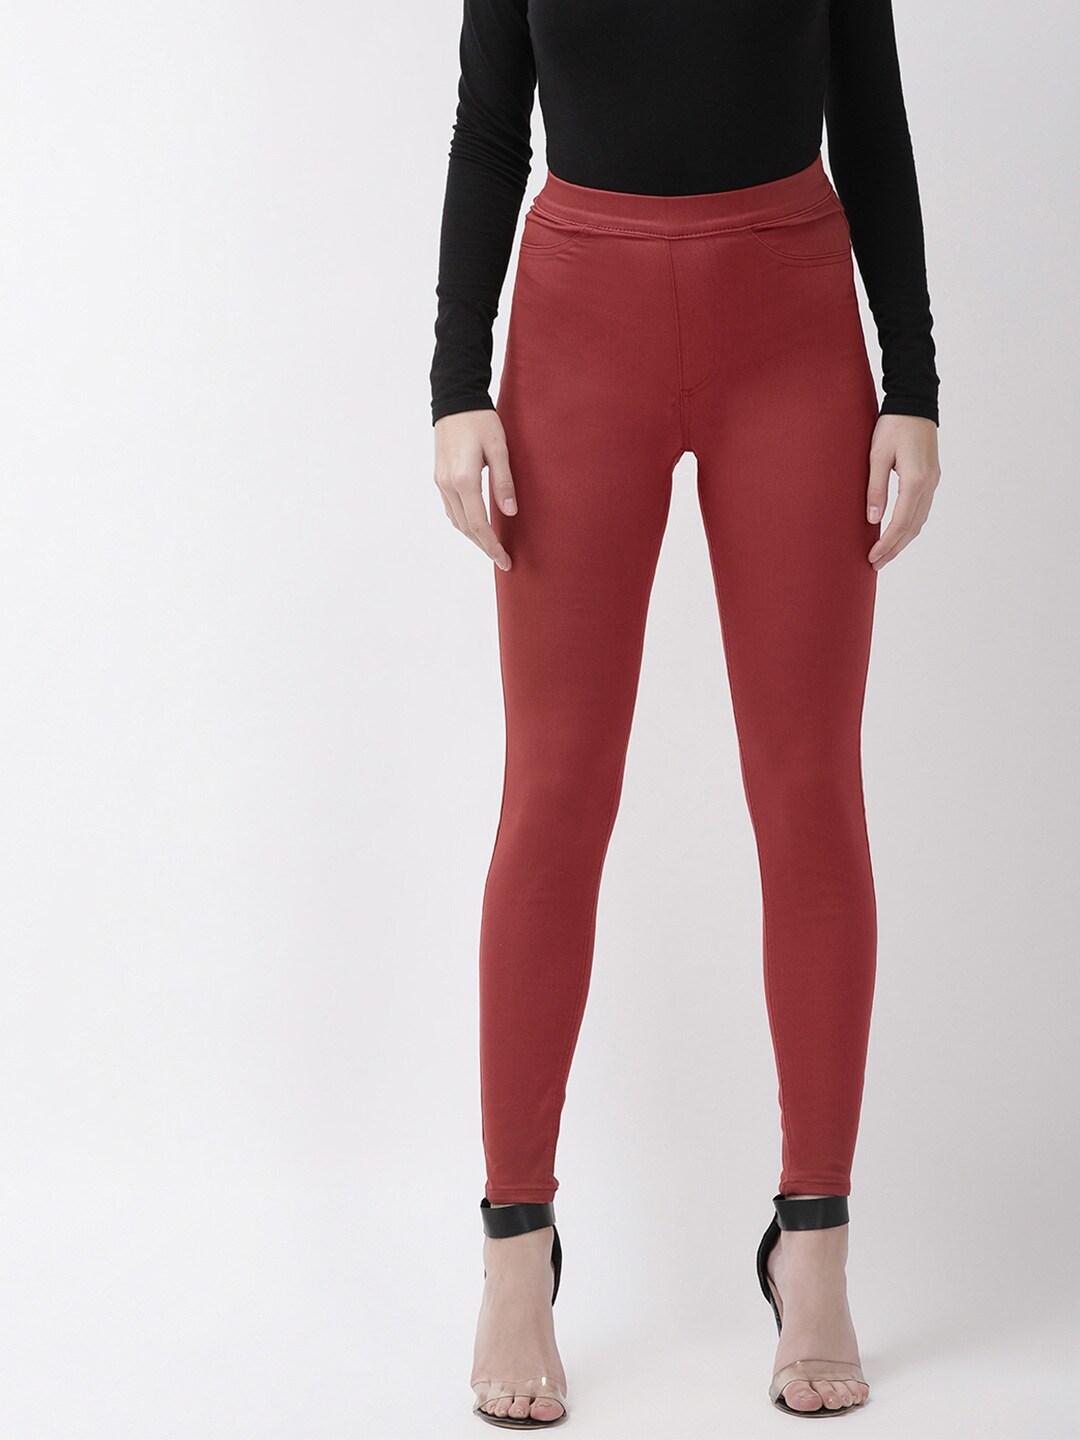 marks-&-spencer-women-rust-red-high-rise-solid-jeggings